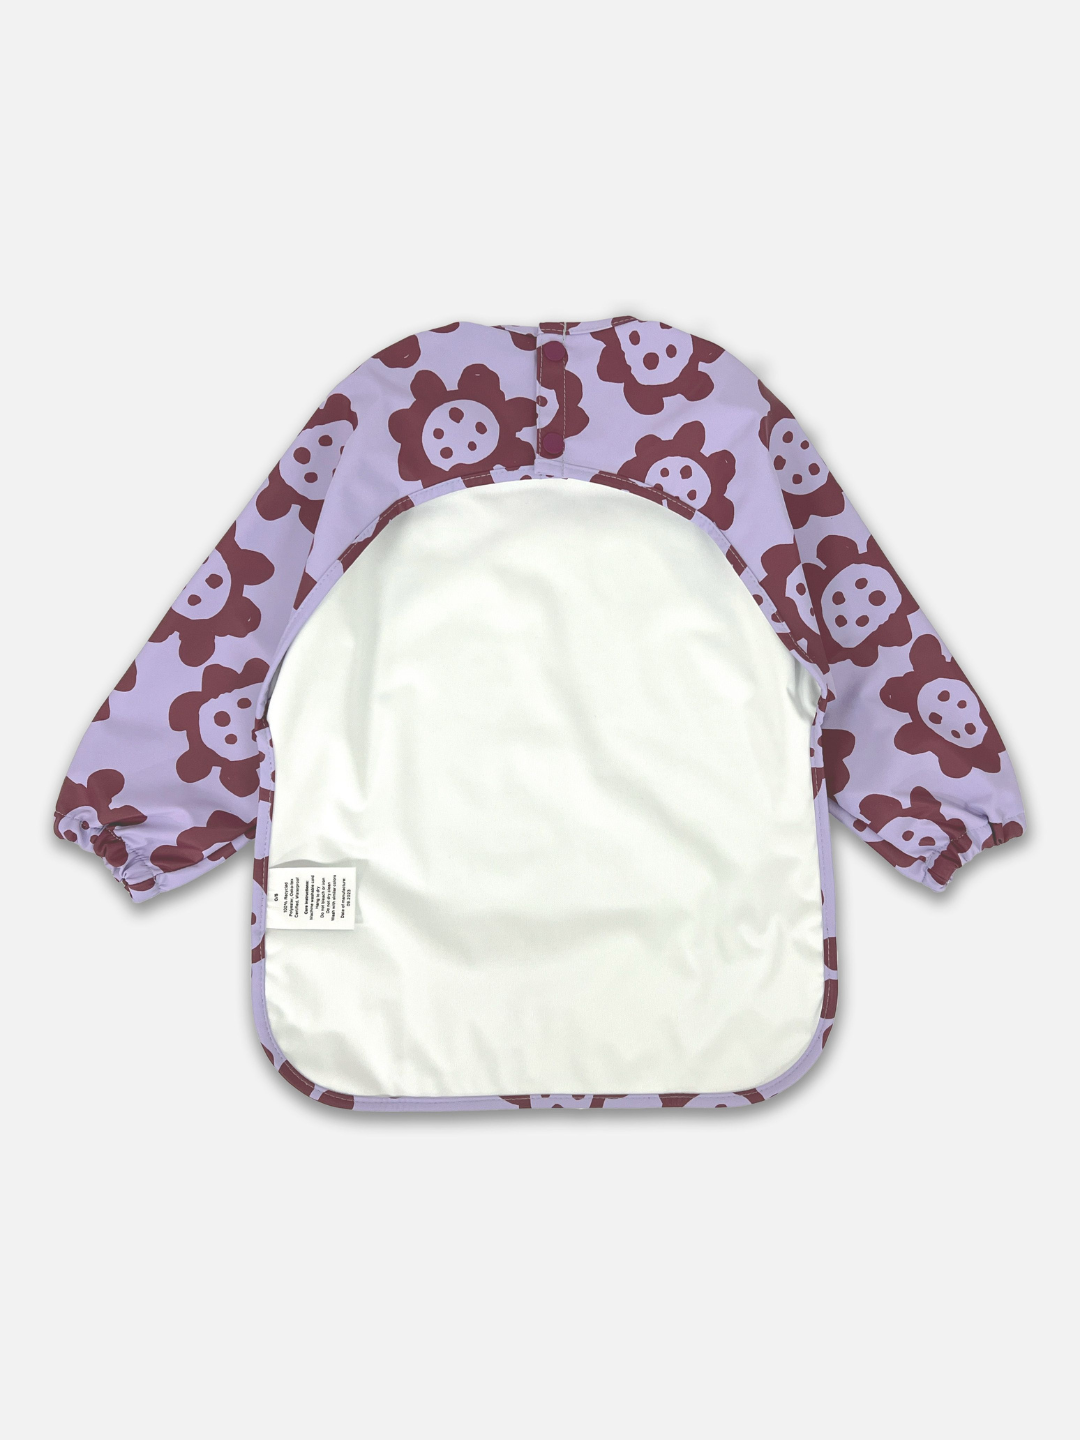 Back View of the long sleeve lavender colored bib with dark purple sunflowers  and a back cut out with two buttons for closure.